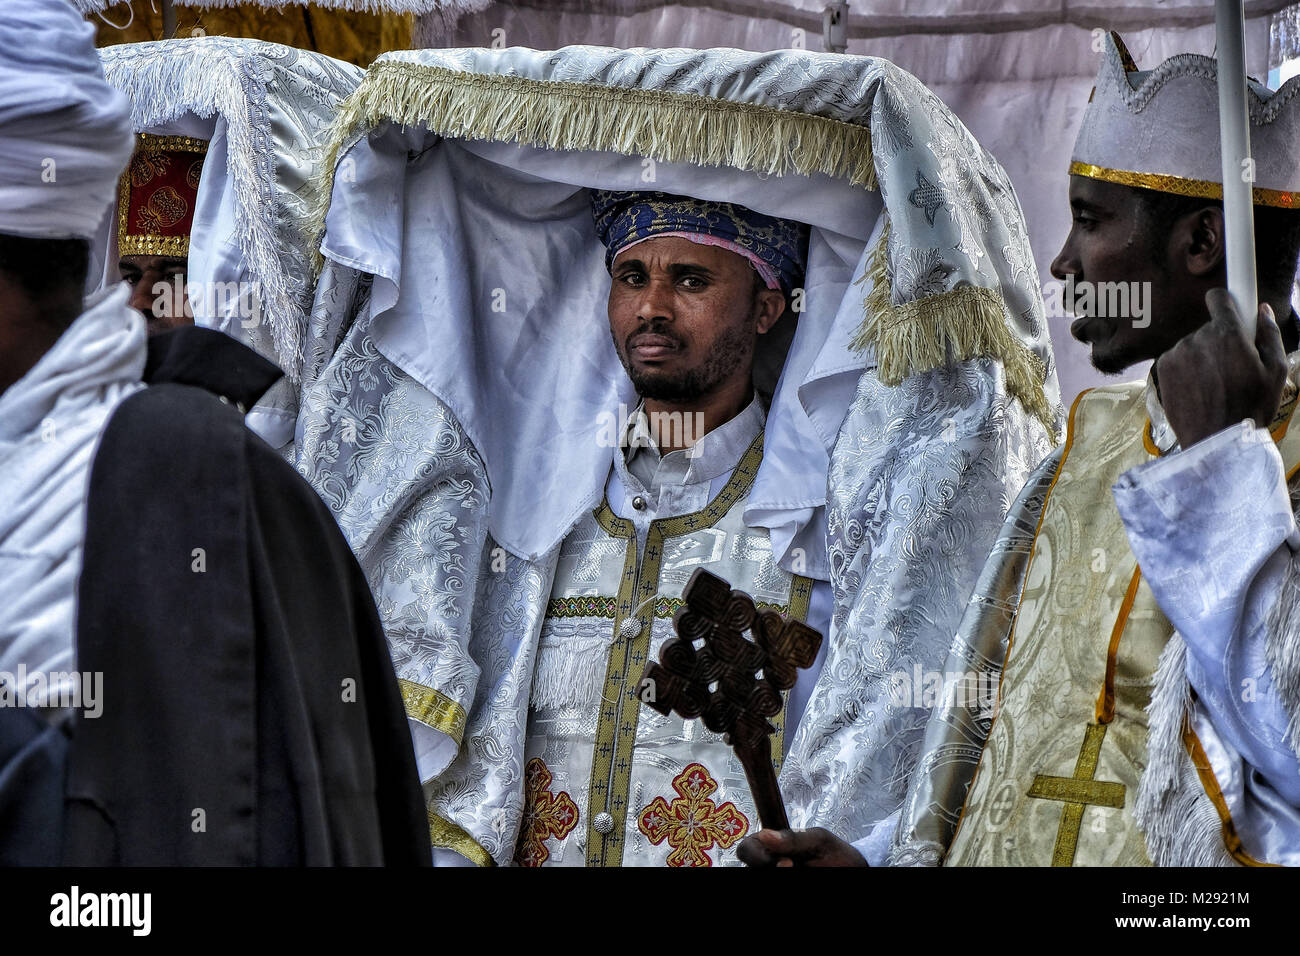 January 18, 2018 - Gondar, Amhara Region, Ethiopia - Orthodox priests carry a tabot, a model of the Ark of the Covenant, on a procession through Gondar..The annual Timkat festival, an Orthodox Christian celebration of Epiphany, remembers the baptism of Jesus in the Jordan river. During the festival, tabots, models of the Ark of the Covenant, are taken from churches around the city of Gondar and paraded through the streets to Fasilides Bath. Where finally the pilgrims end up bathing in the water blessed by the priests. (Credit Image: © Oscar Espinosa/SOPA via ZUMA Wire) Stock Photo